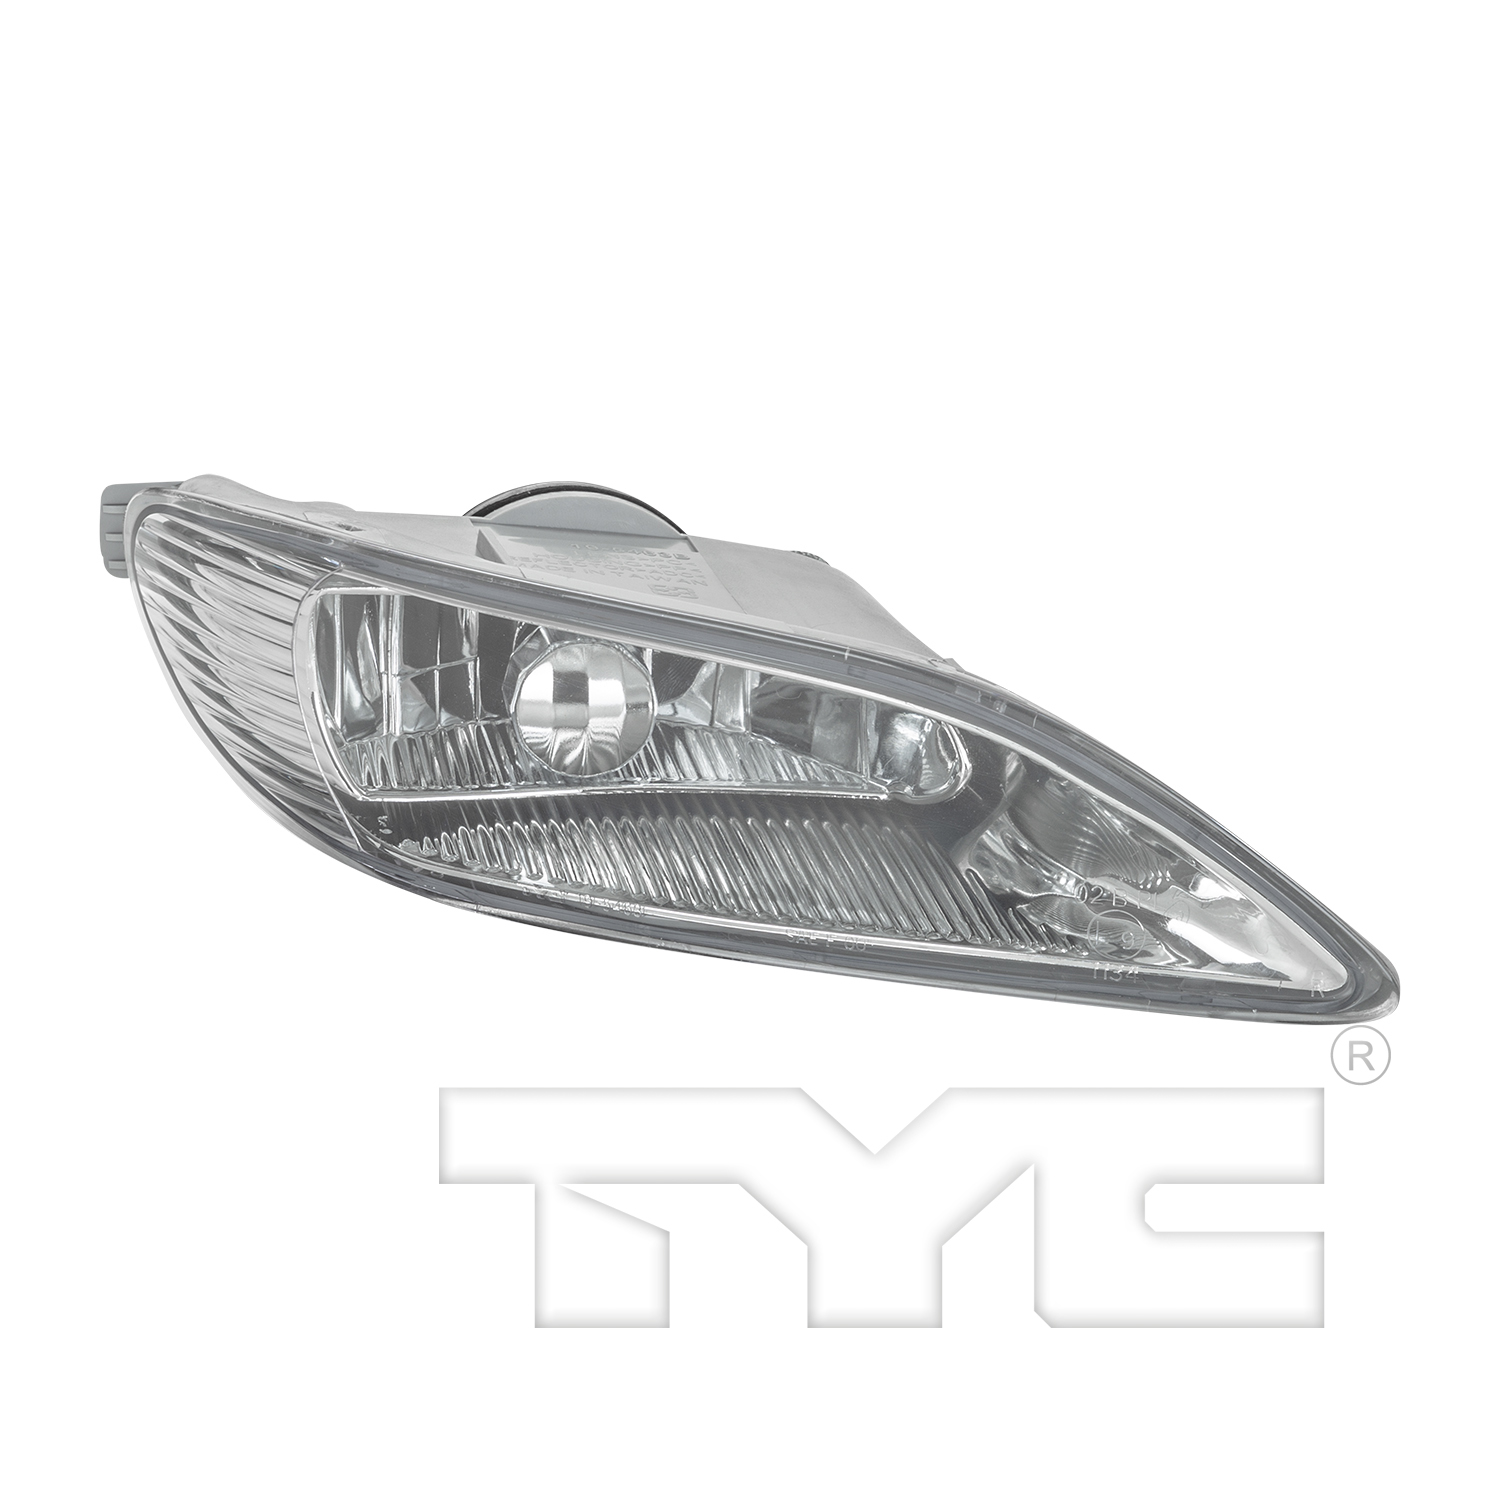 Aftermarket FOG LIGHTS for TOYOTA - CAMRY, CAMRY,02-04,RT Fog lamp assy